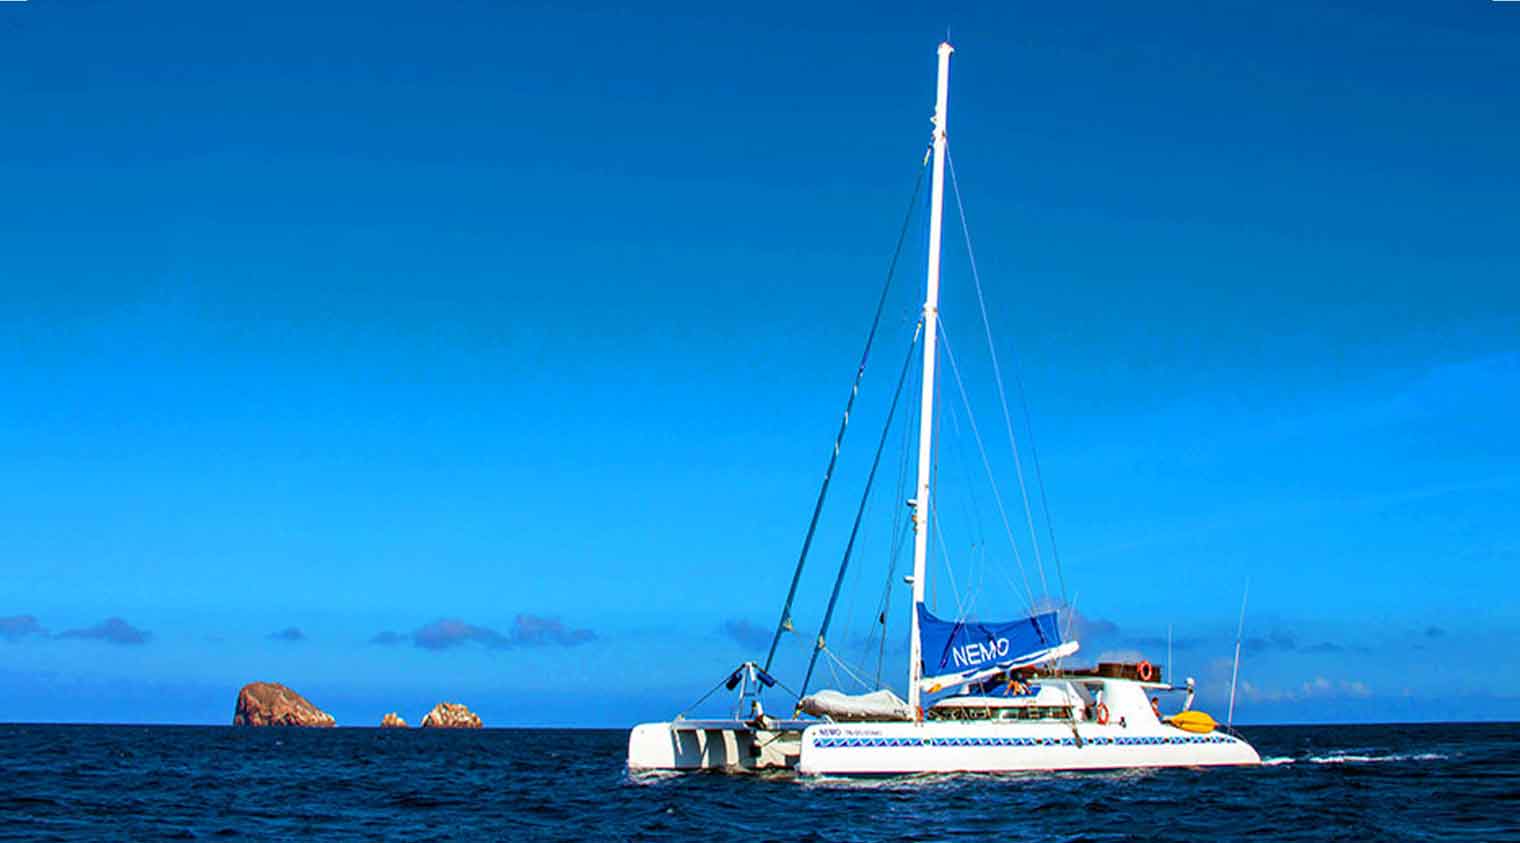 aerial photo of nemo 1 yacht of galapagos islands